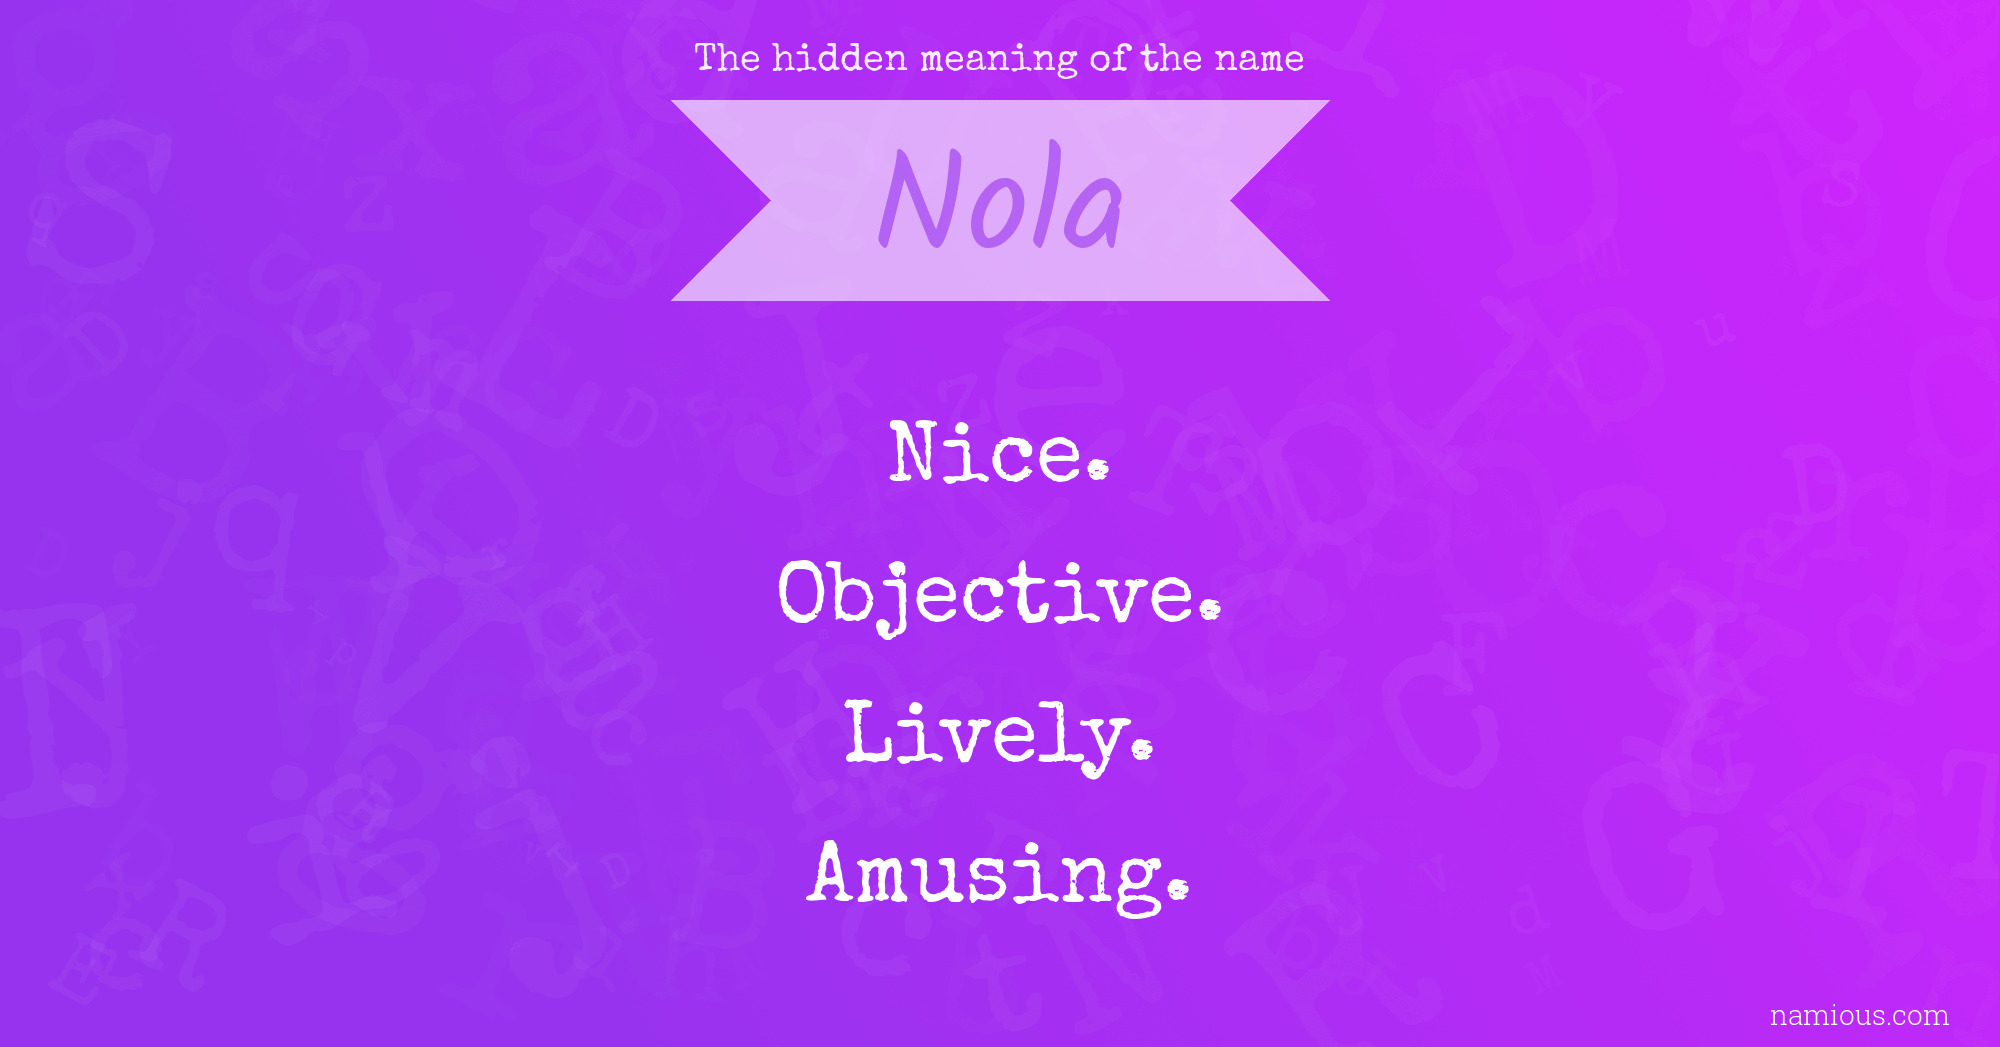 The hidden meaning of the name Nola